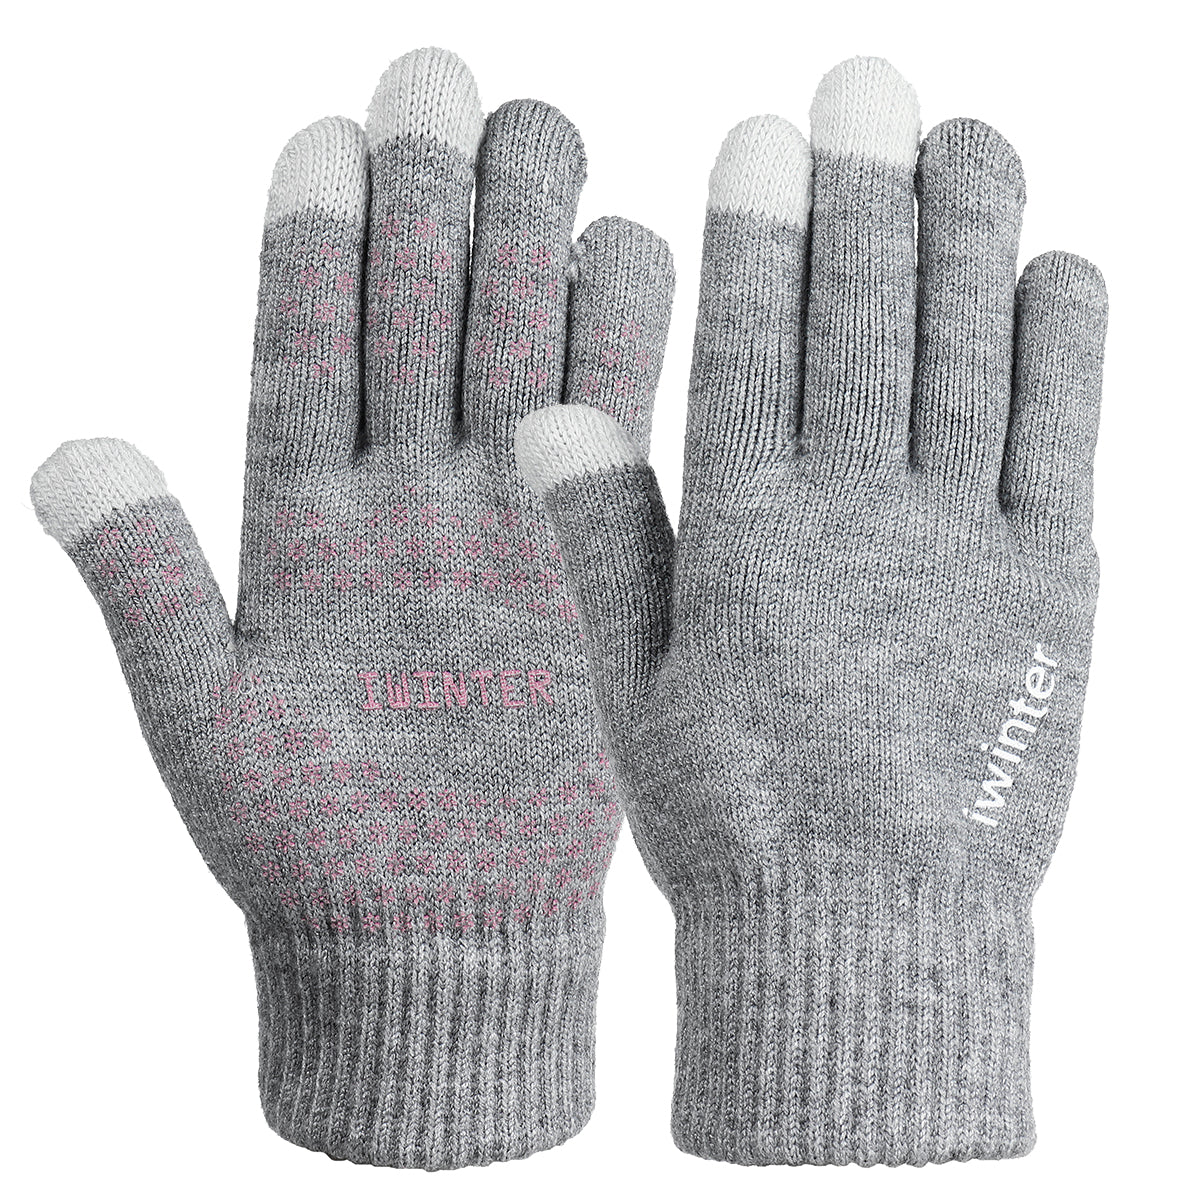 Dark Gray Knitted Touch Screen Outdoor Gloves Motorcycle Winter Warm Windproof Fleece Lined Thermal Non-slip